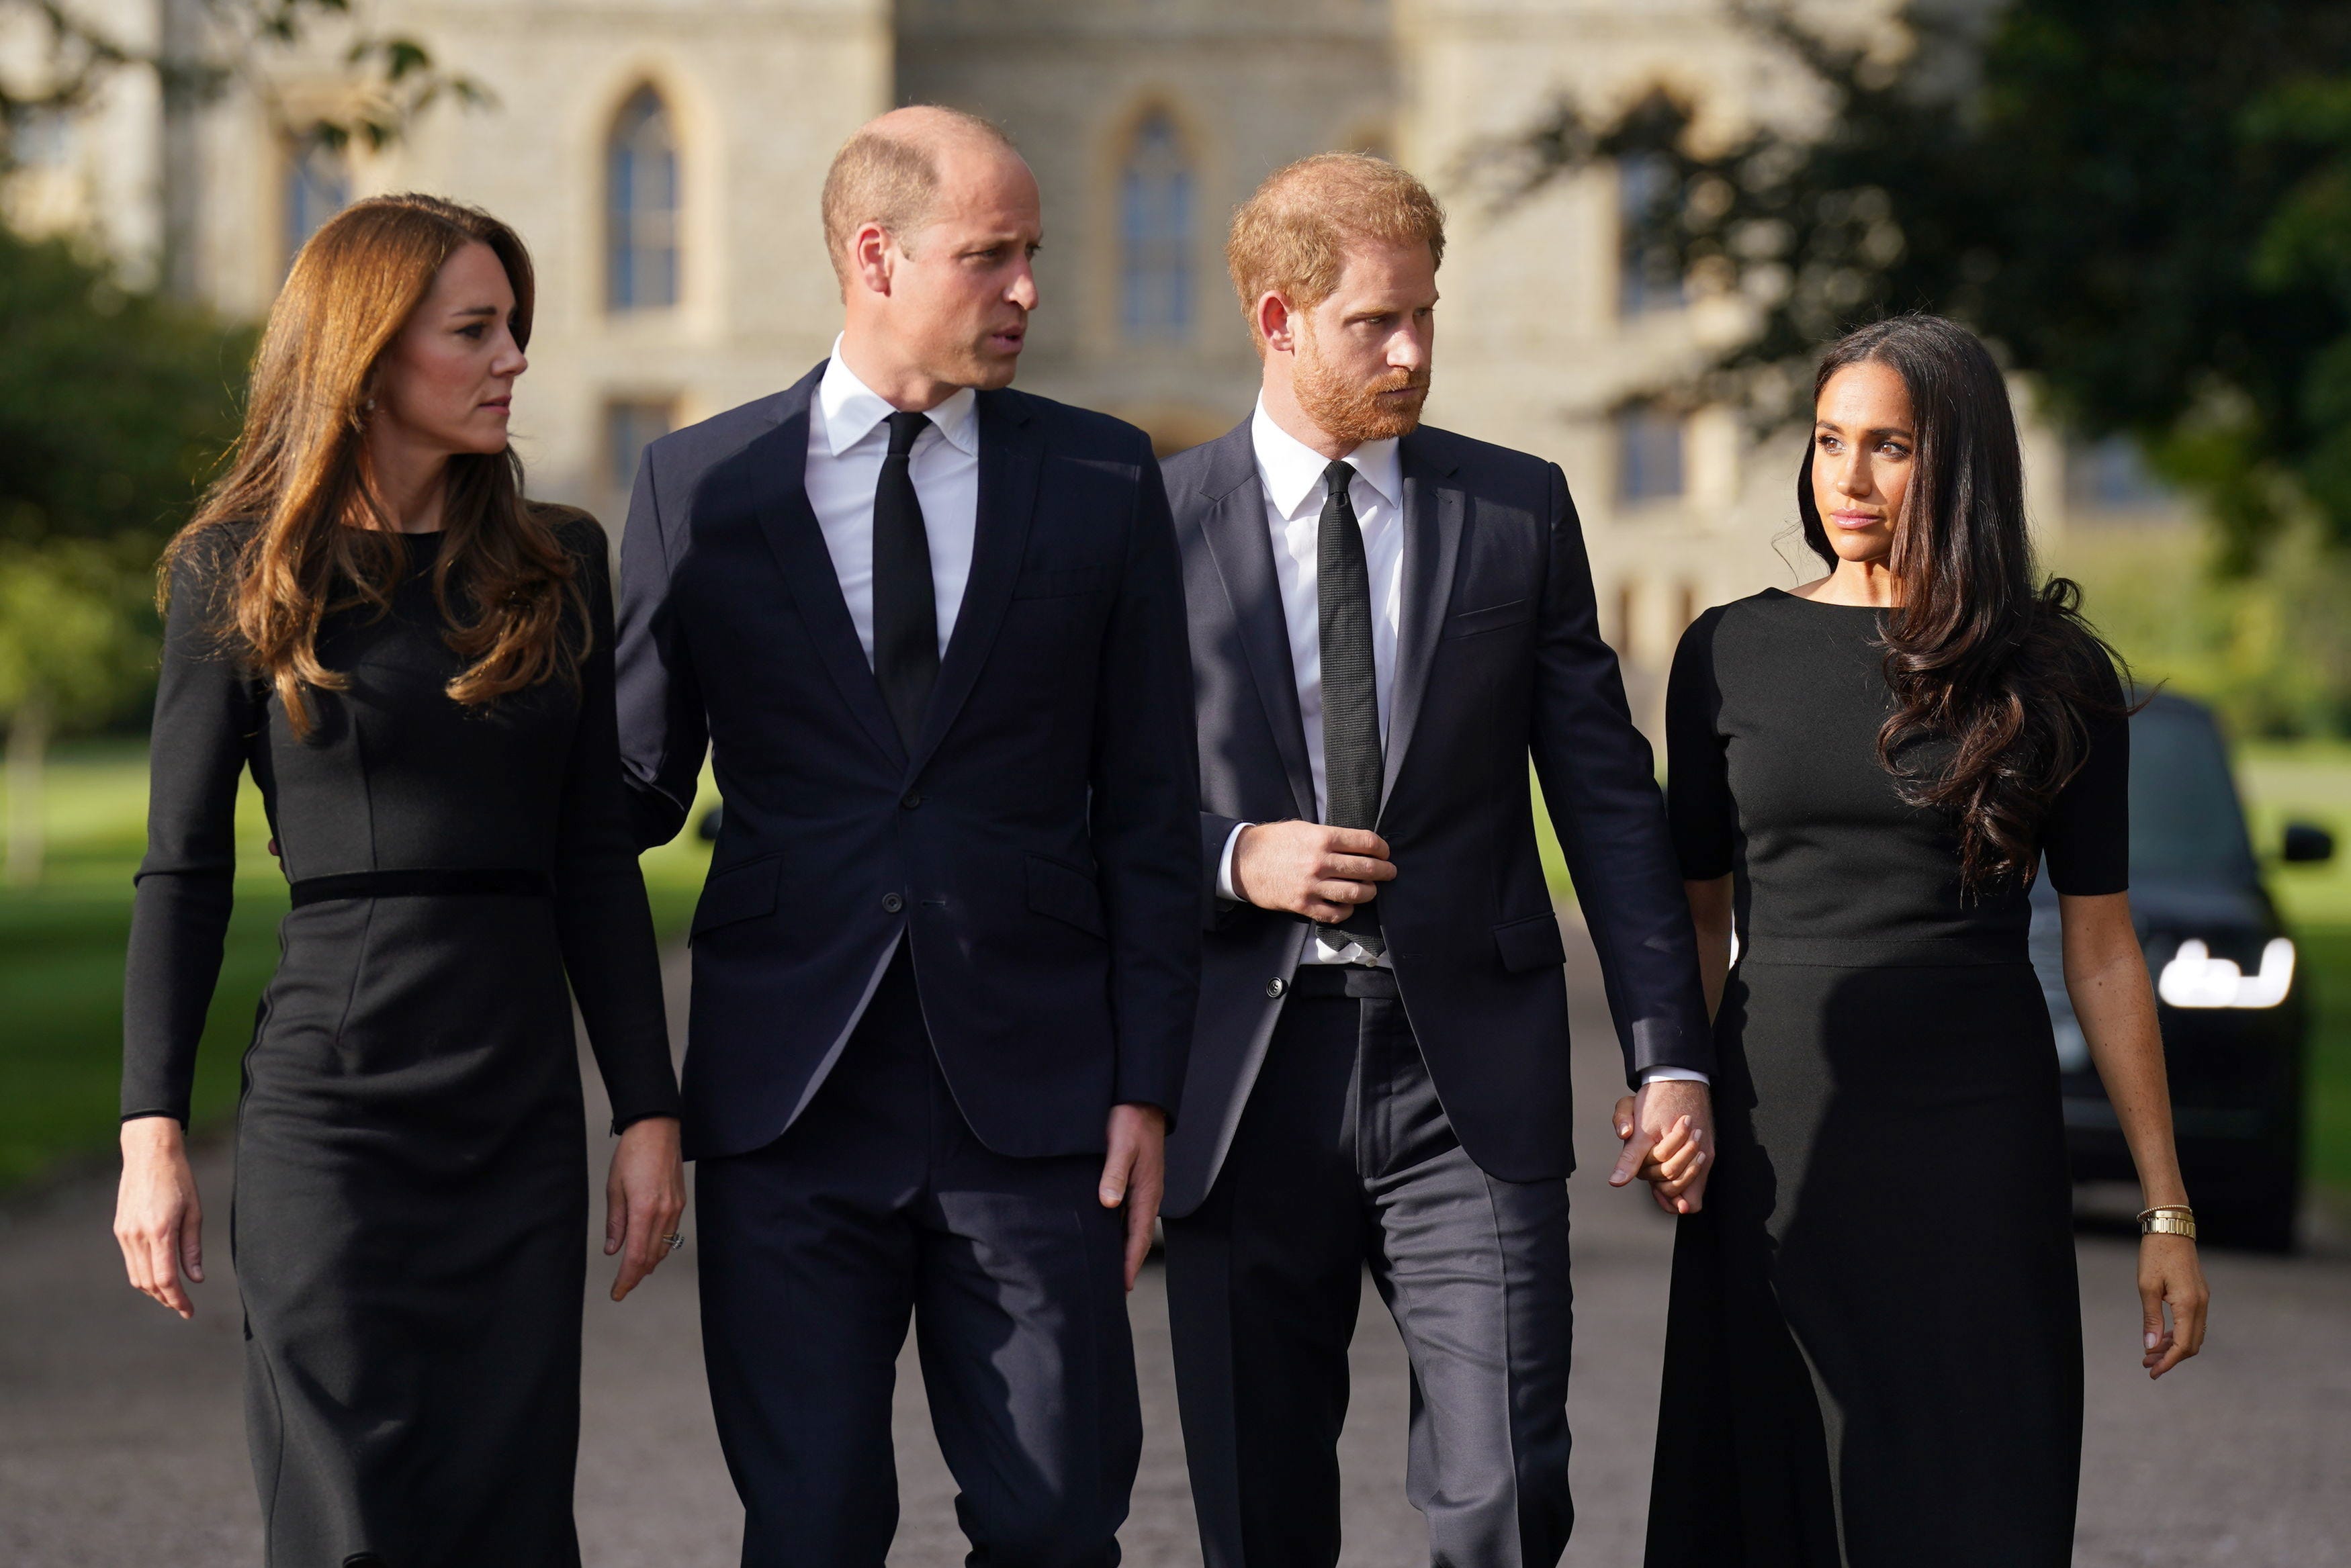 The Duke and Duchess of Sussex's spokesperson made a point to distance them from the situation.